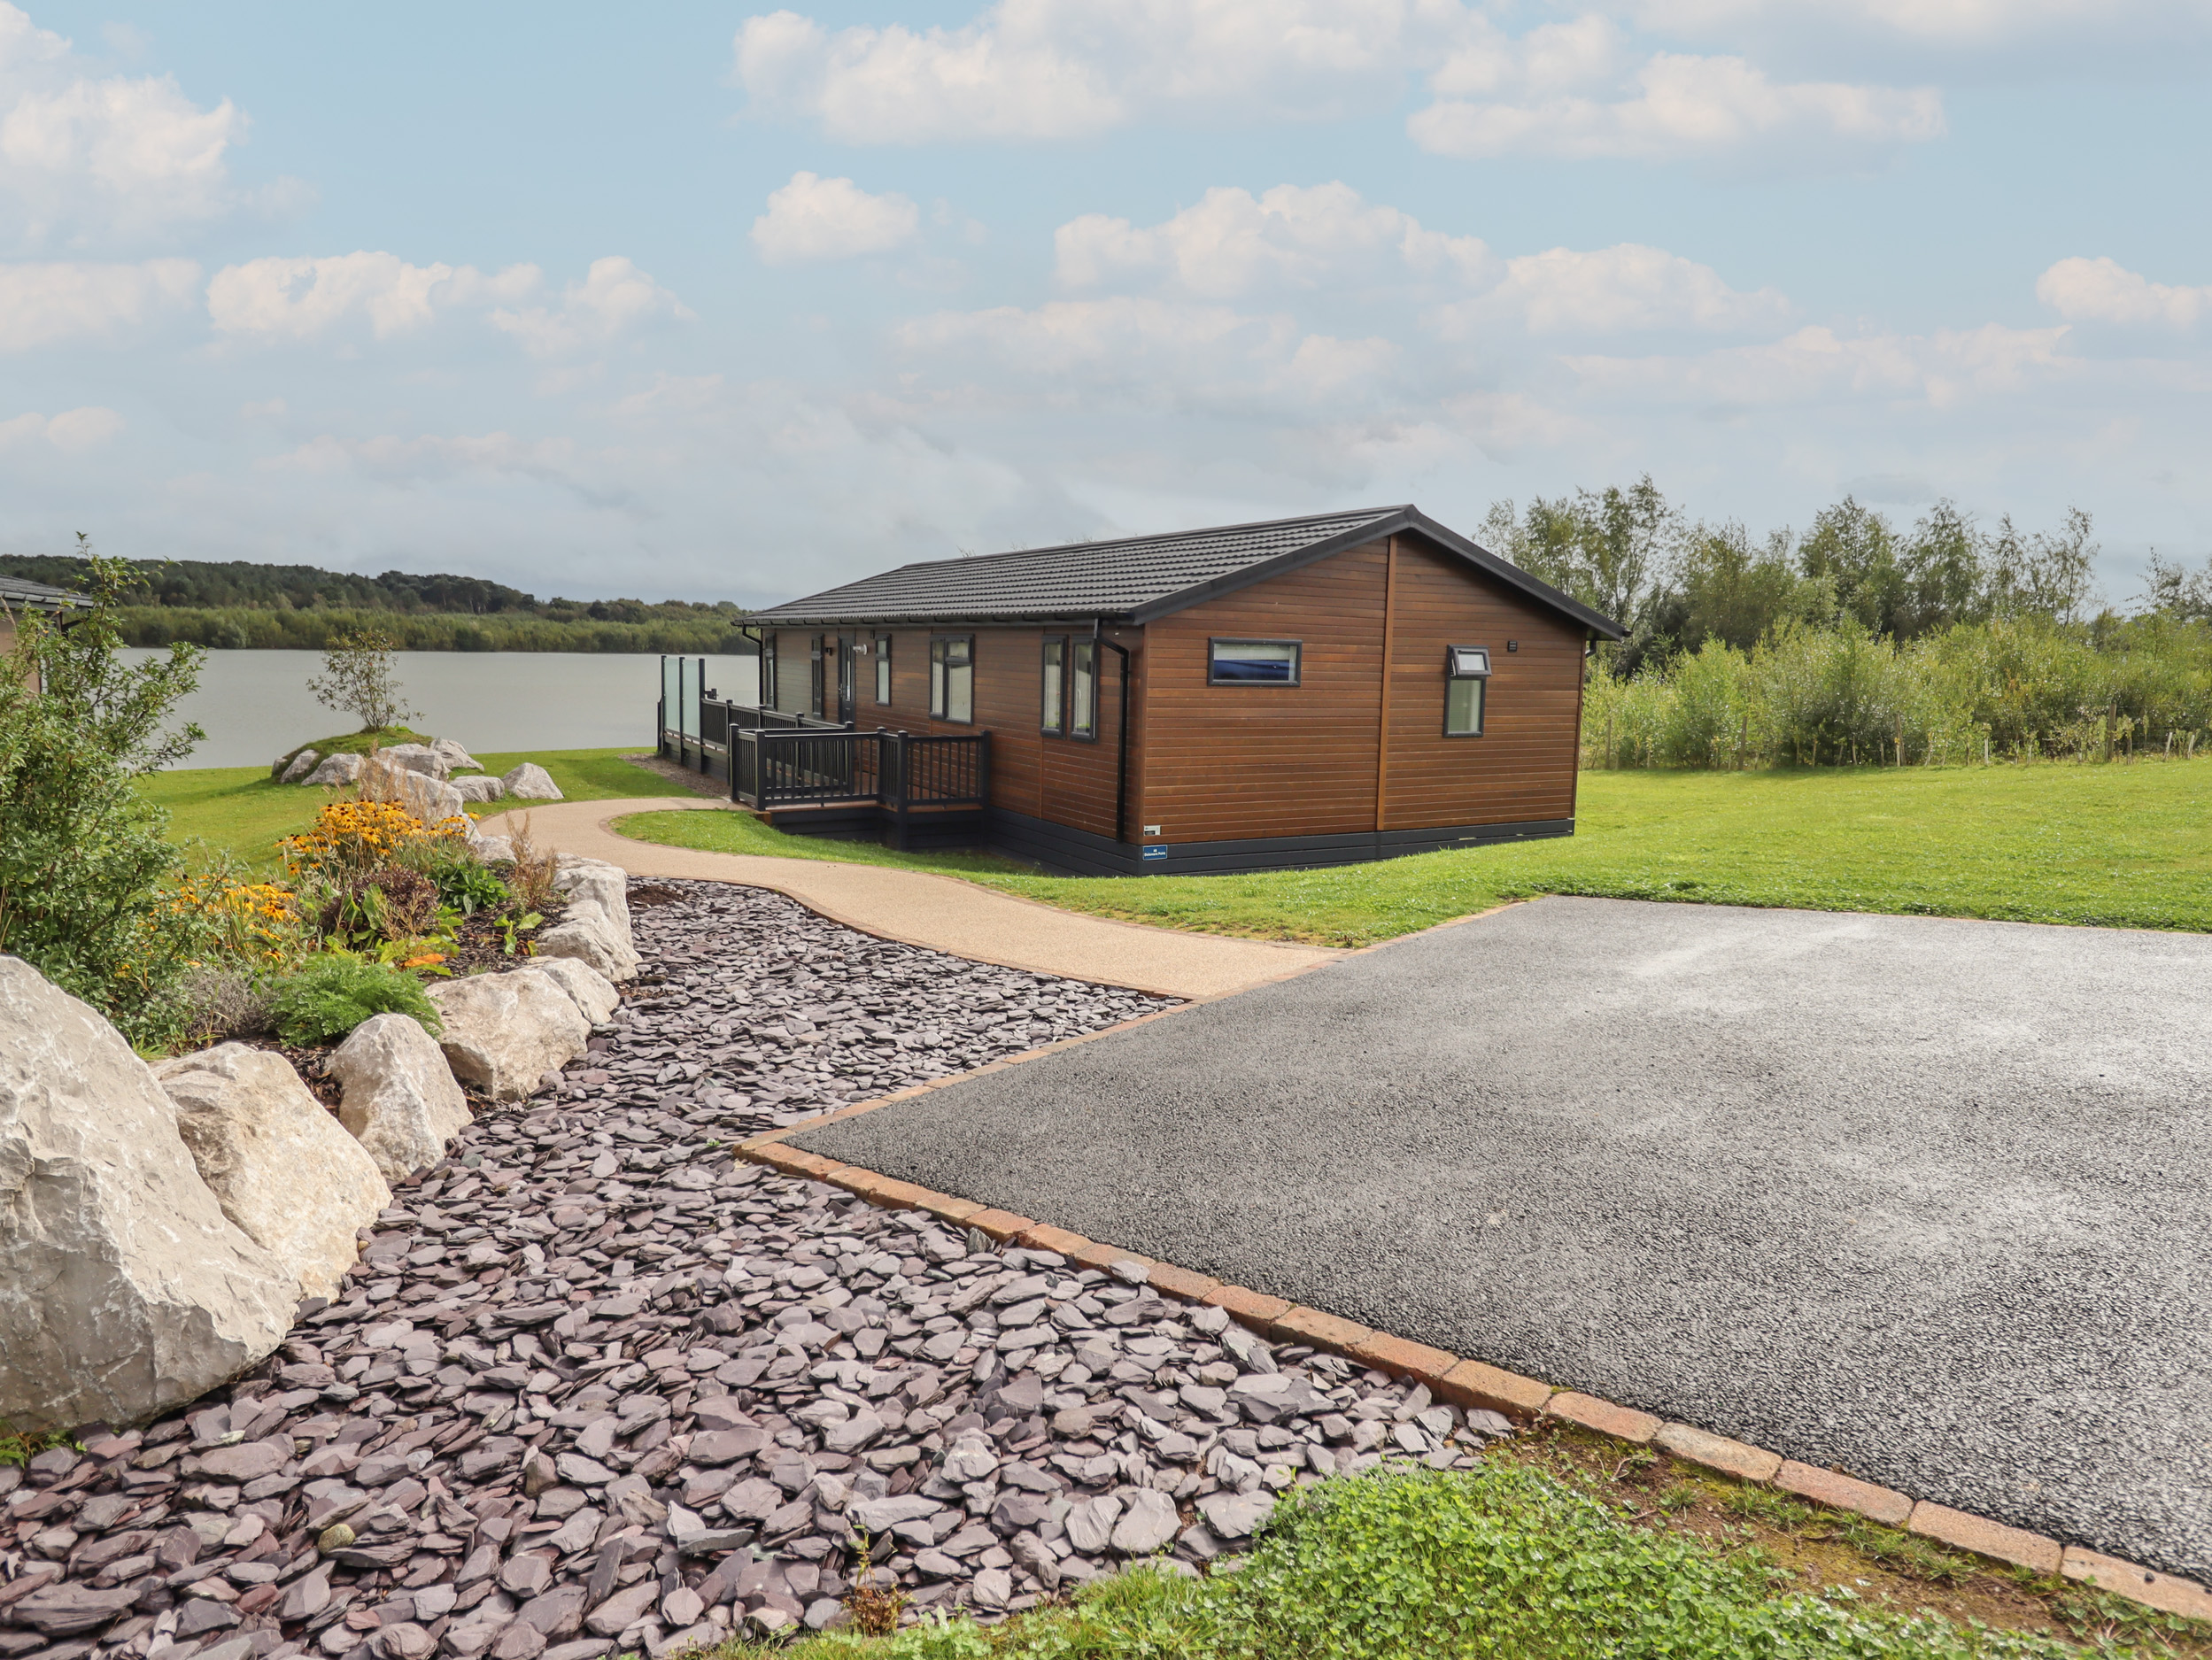 Lodge 40 is in Delamere, Cheshire. Close to amenities and a lake. Ground-floor living. Hot tub. 4bed